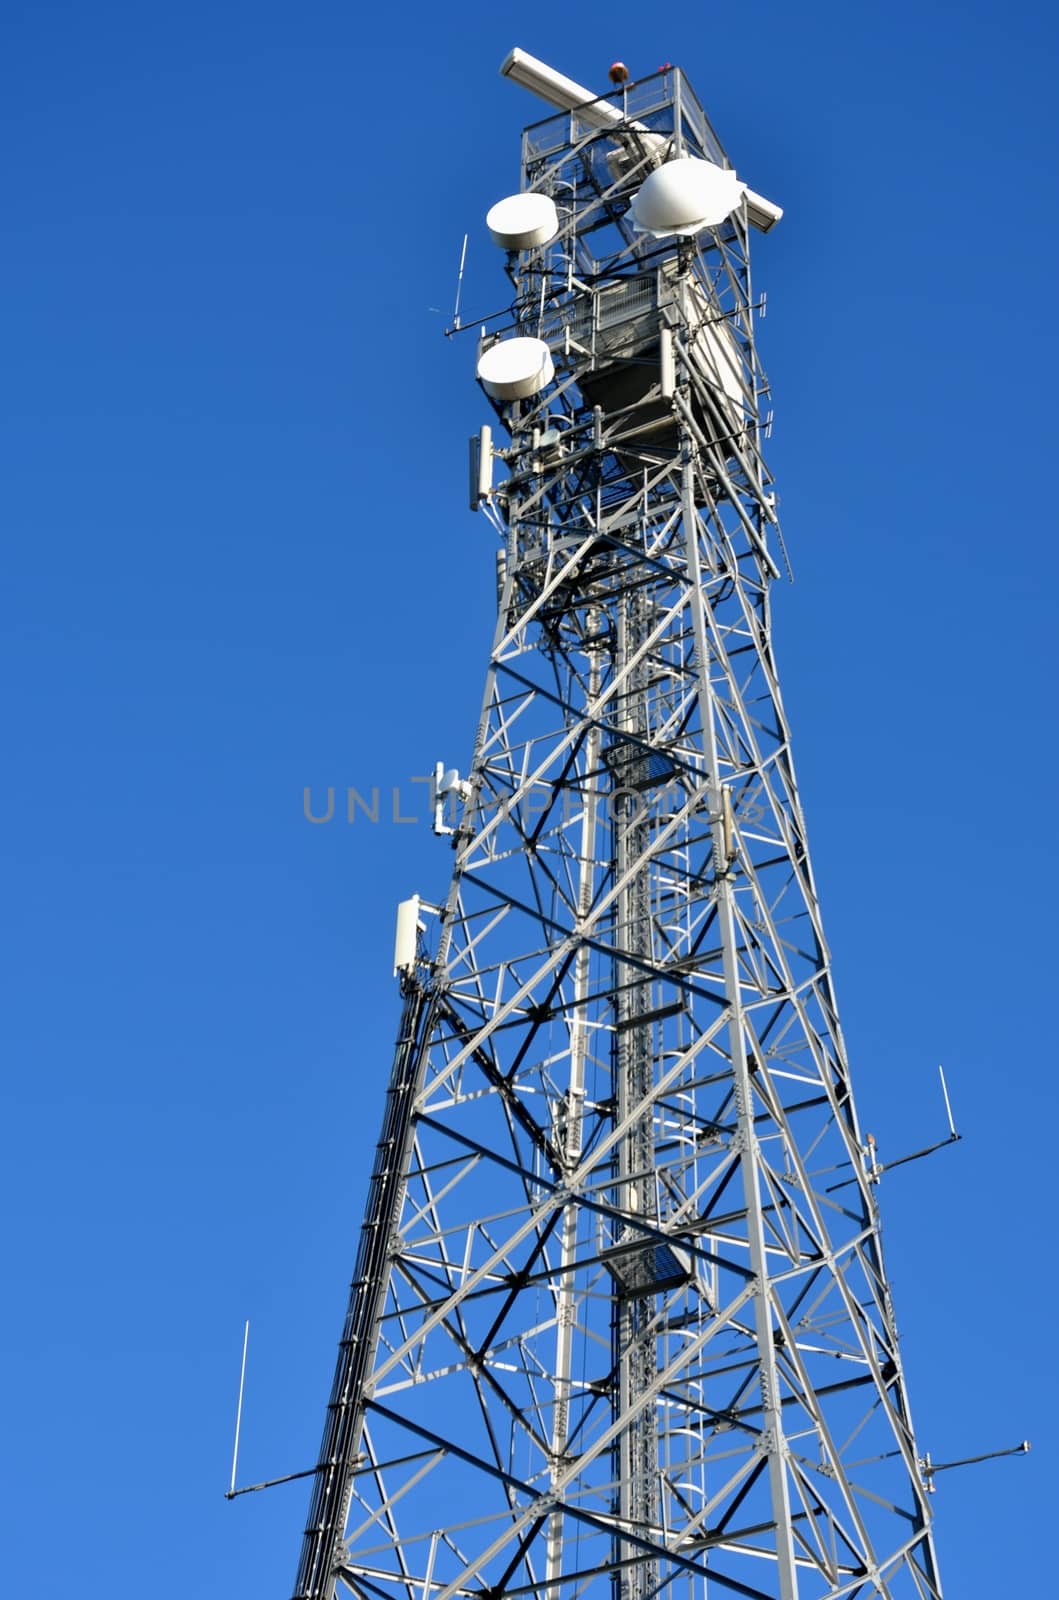 Communication Tower with dishes